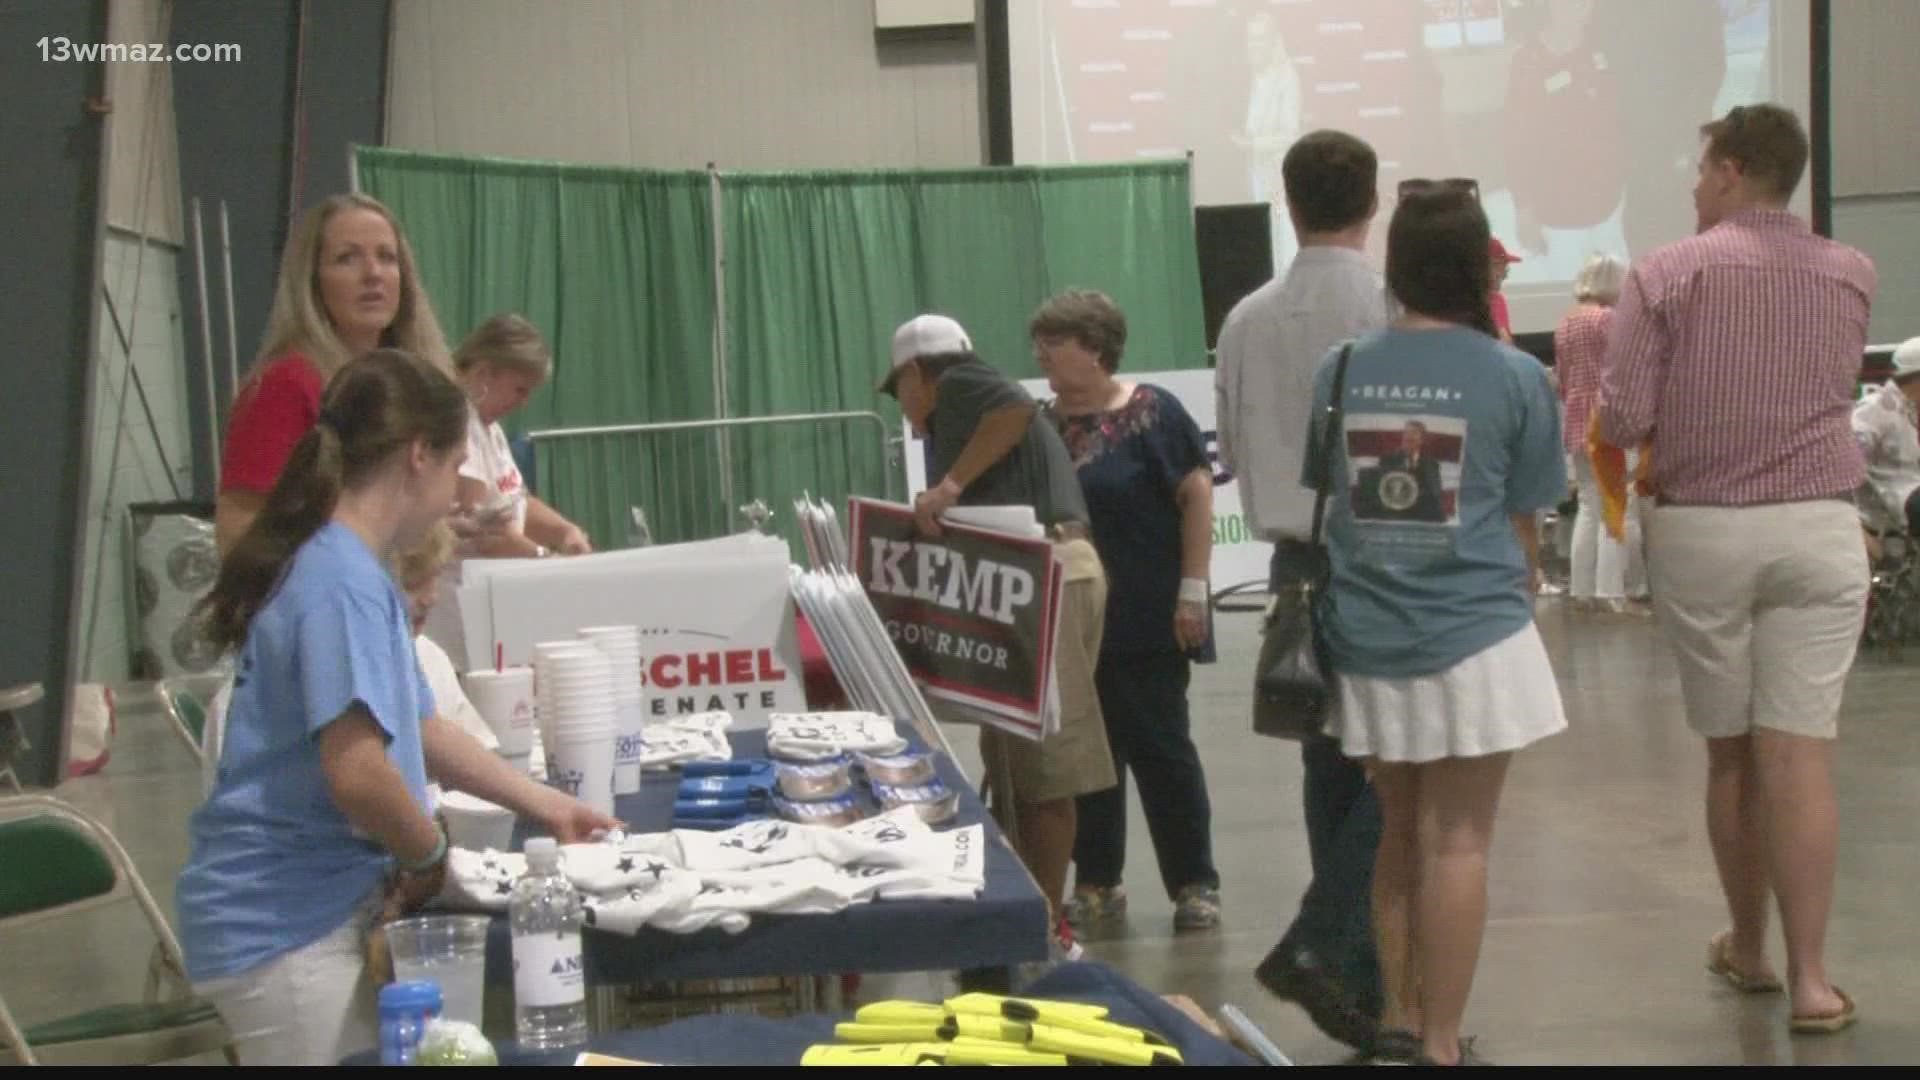 The 8th annual GOP Fish Fry happened on Saturday.